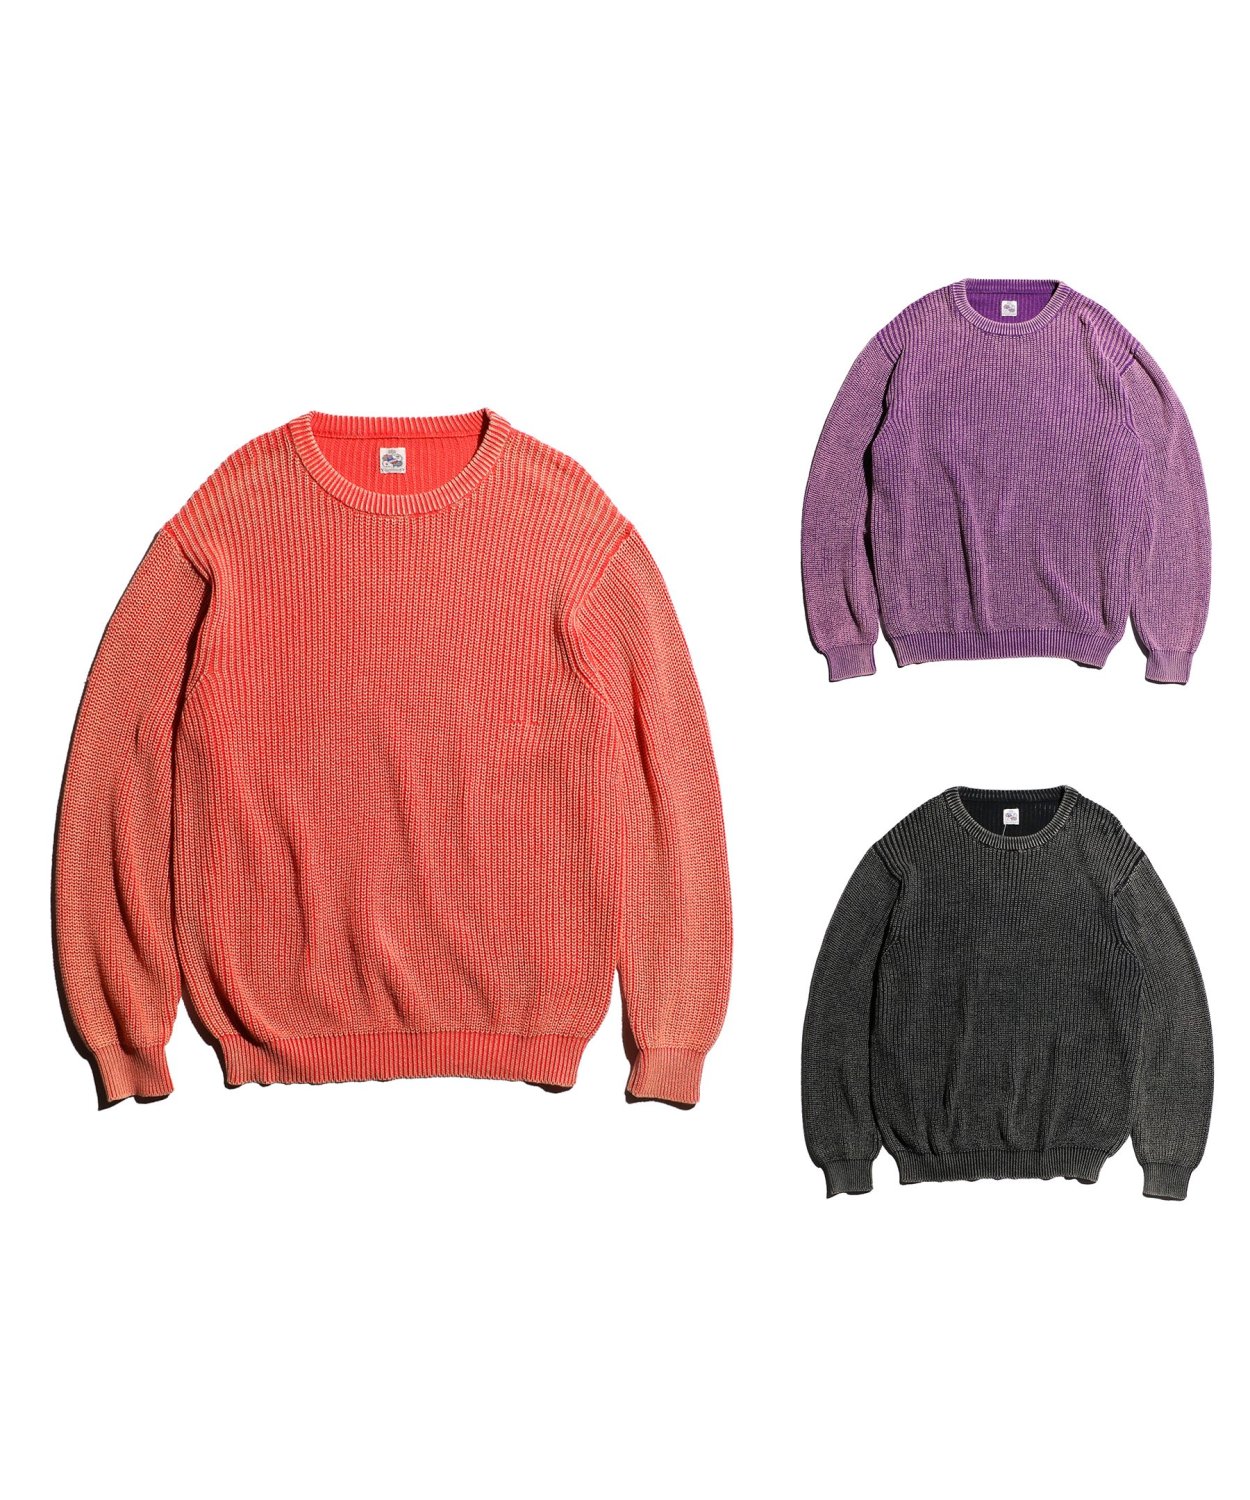 SUNNY SPORTS / LOW GUAGE CREW NECK SWEATER